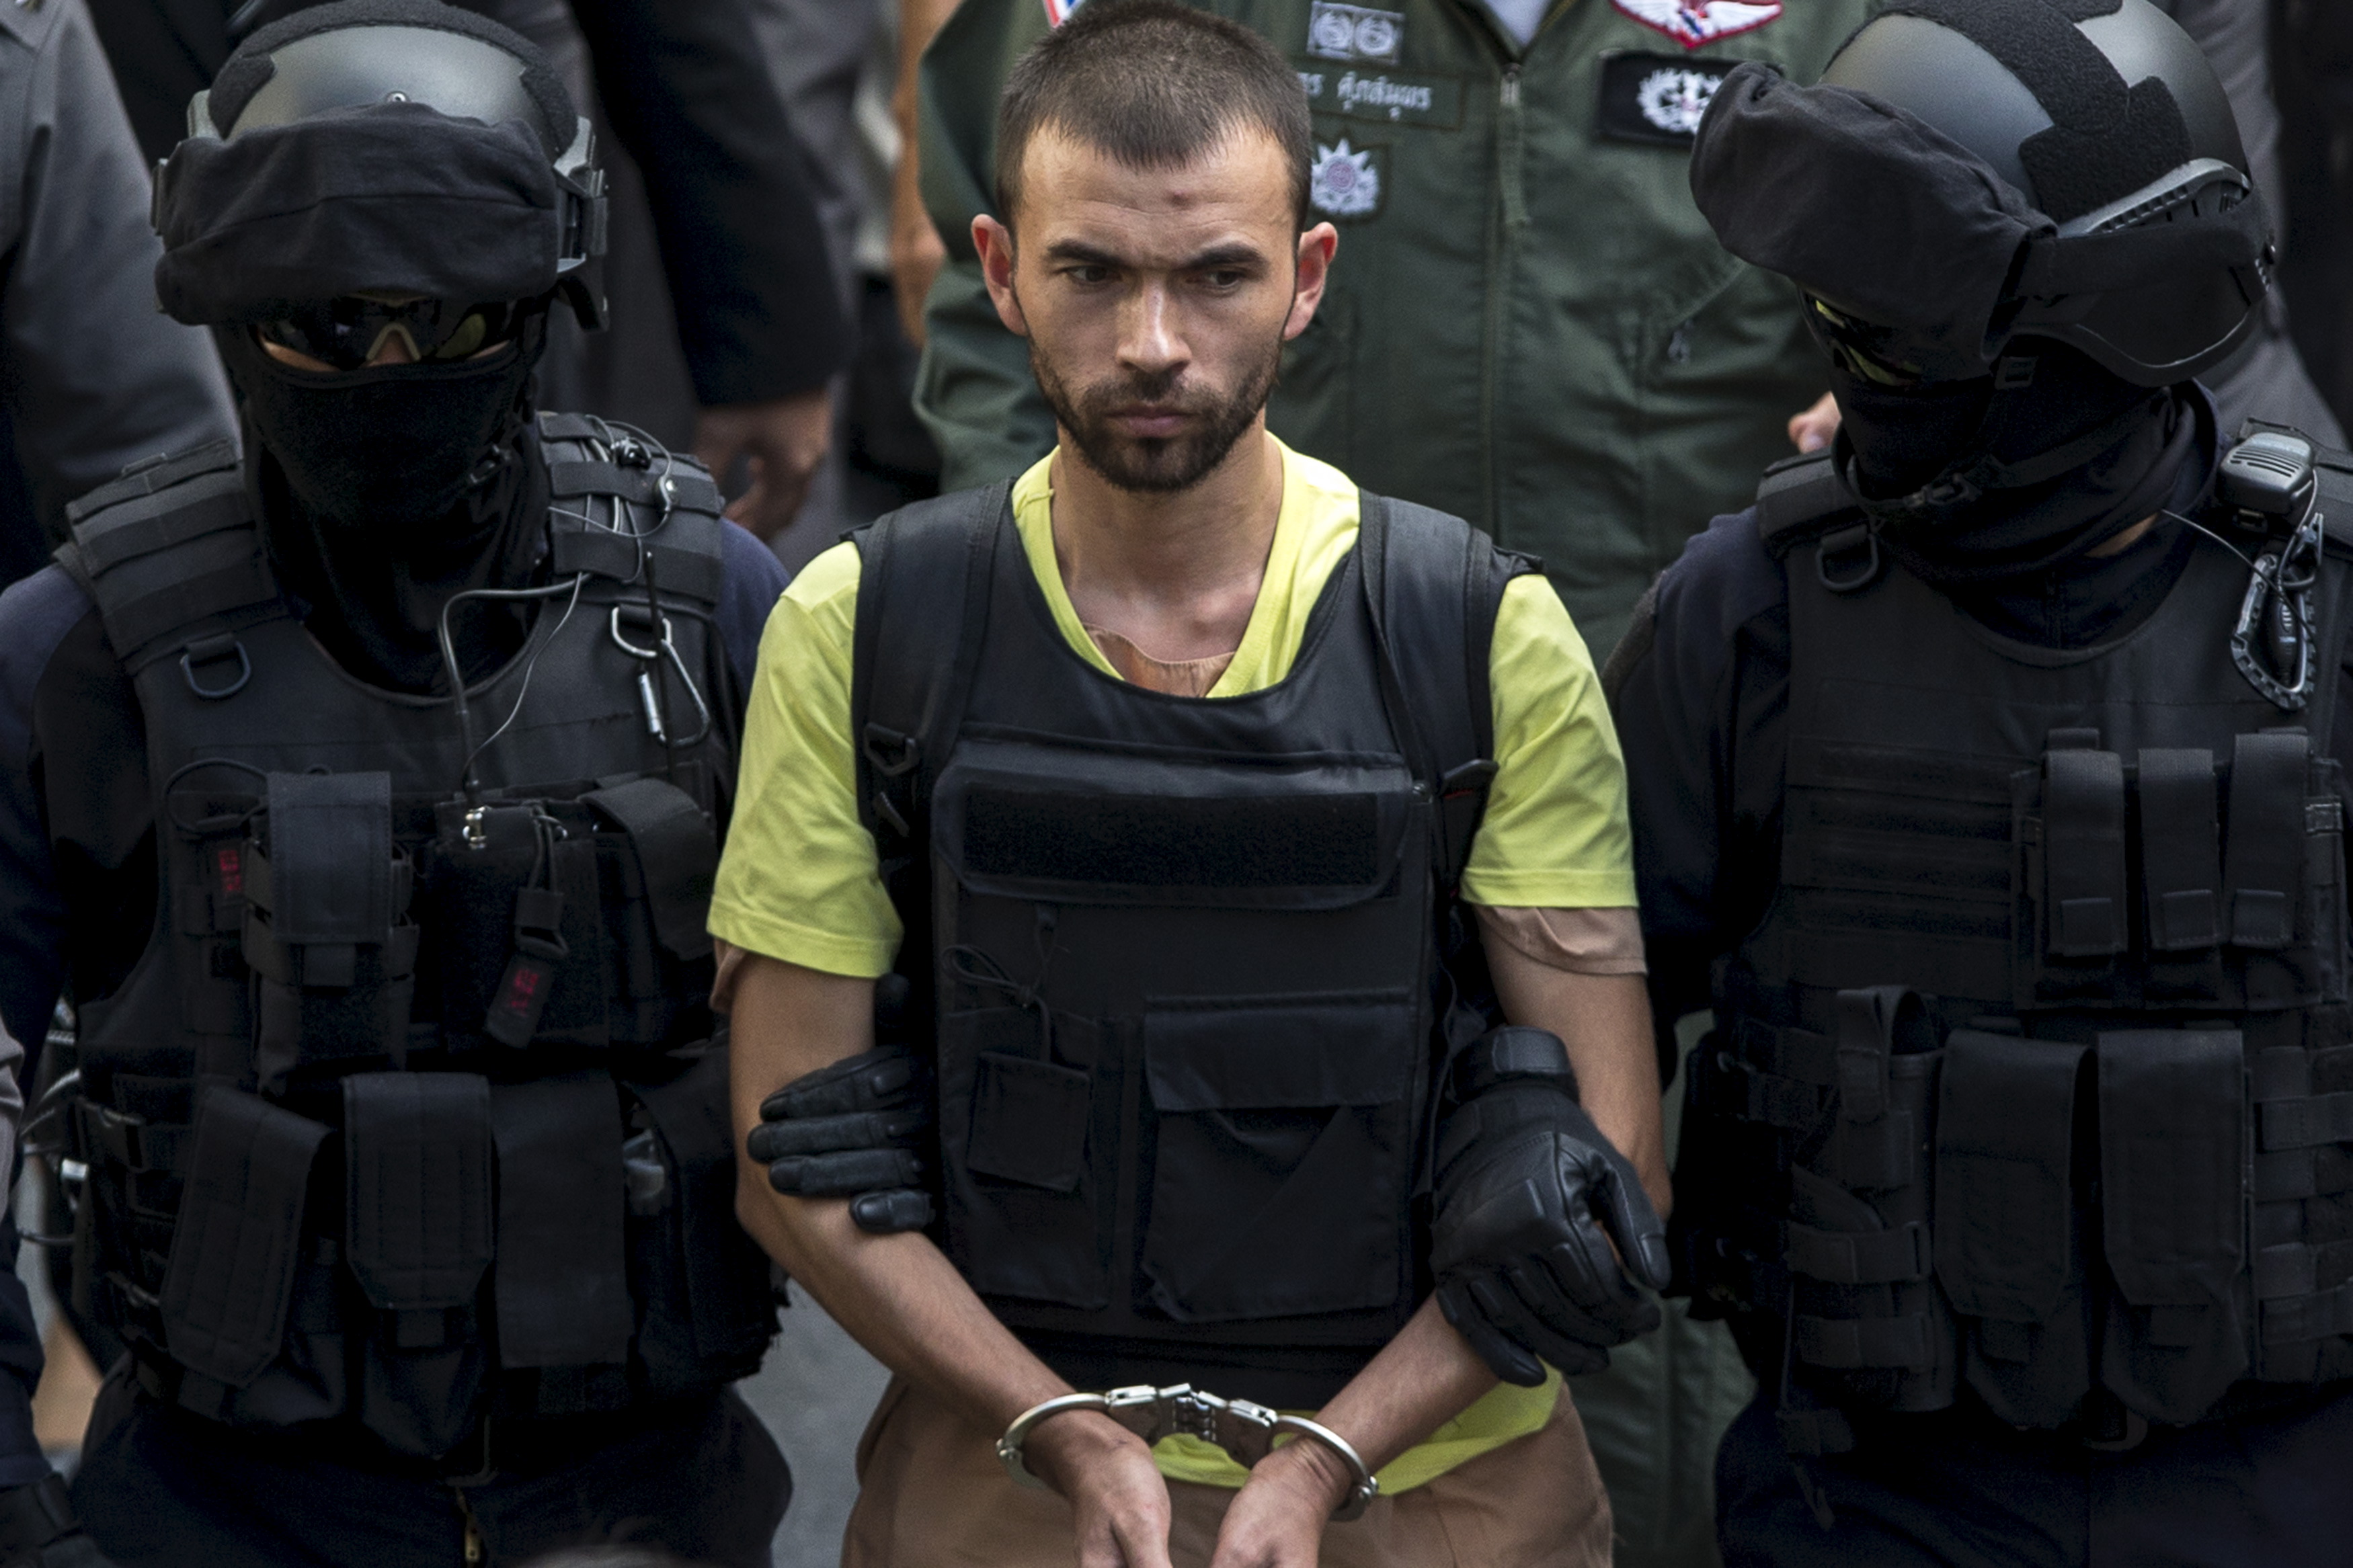 A suspect of the August 17 Bangkok blast is escorted by police officers during a crime re-enactment near the bomb site at Erawan Shrine in Bangkok